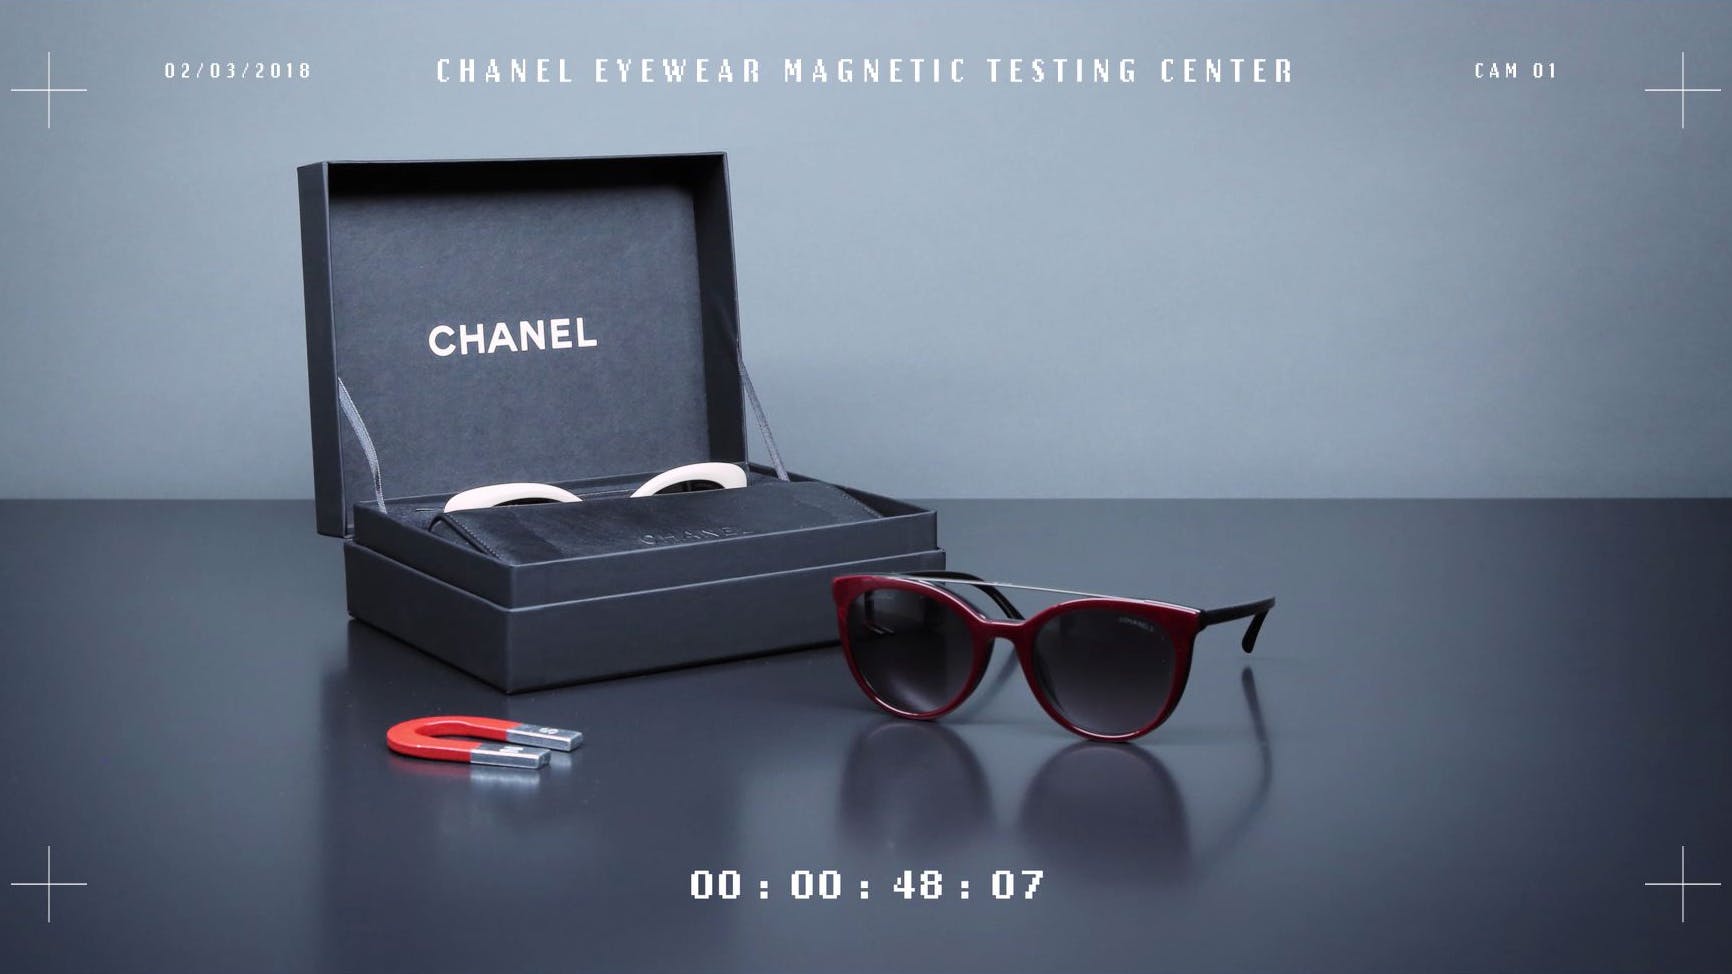 These Chanel Summer 2018 Magnetic Clip Sunglasses are a must have